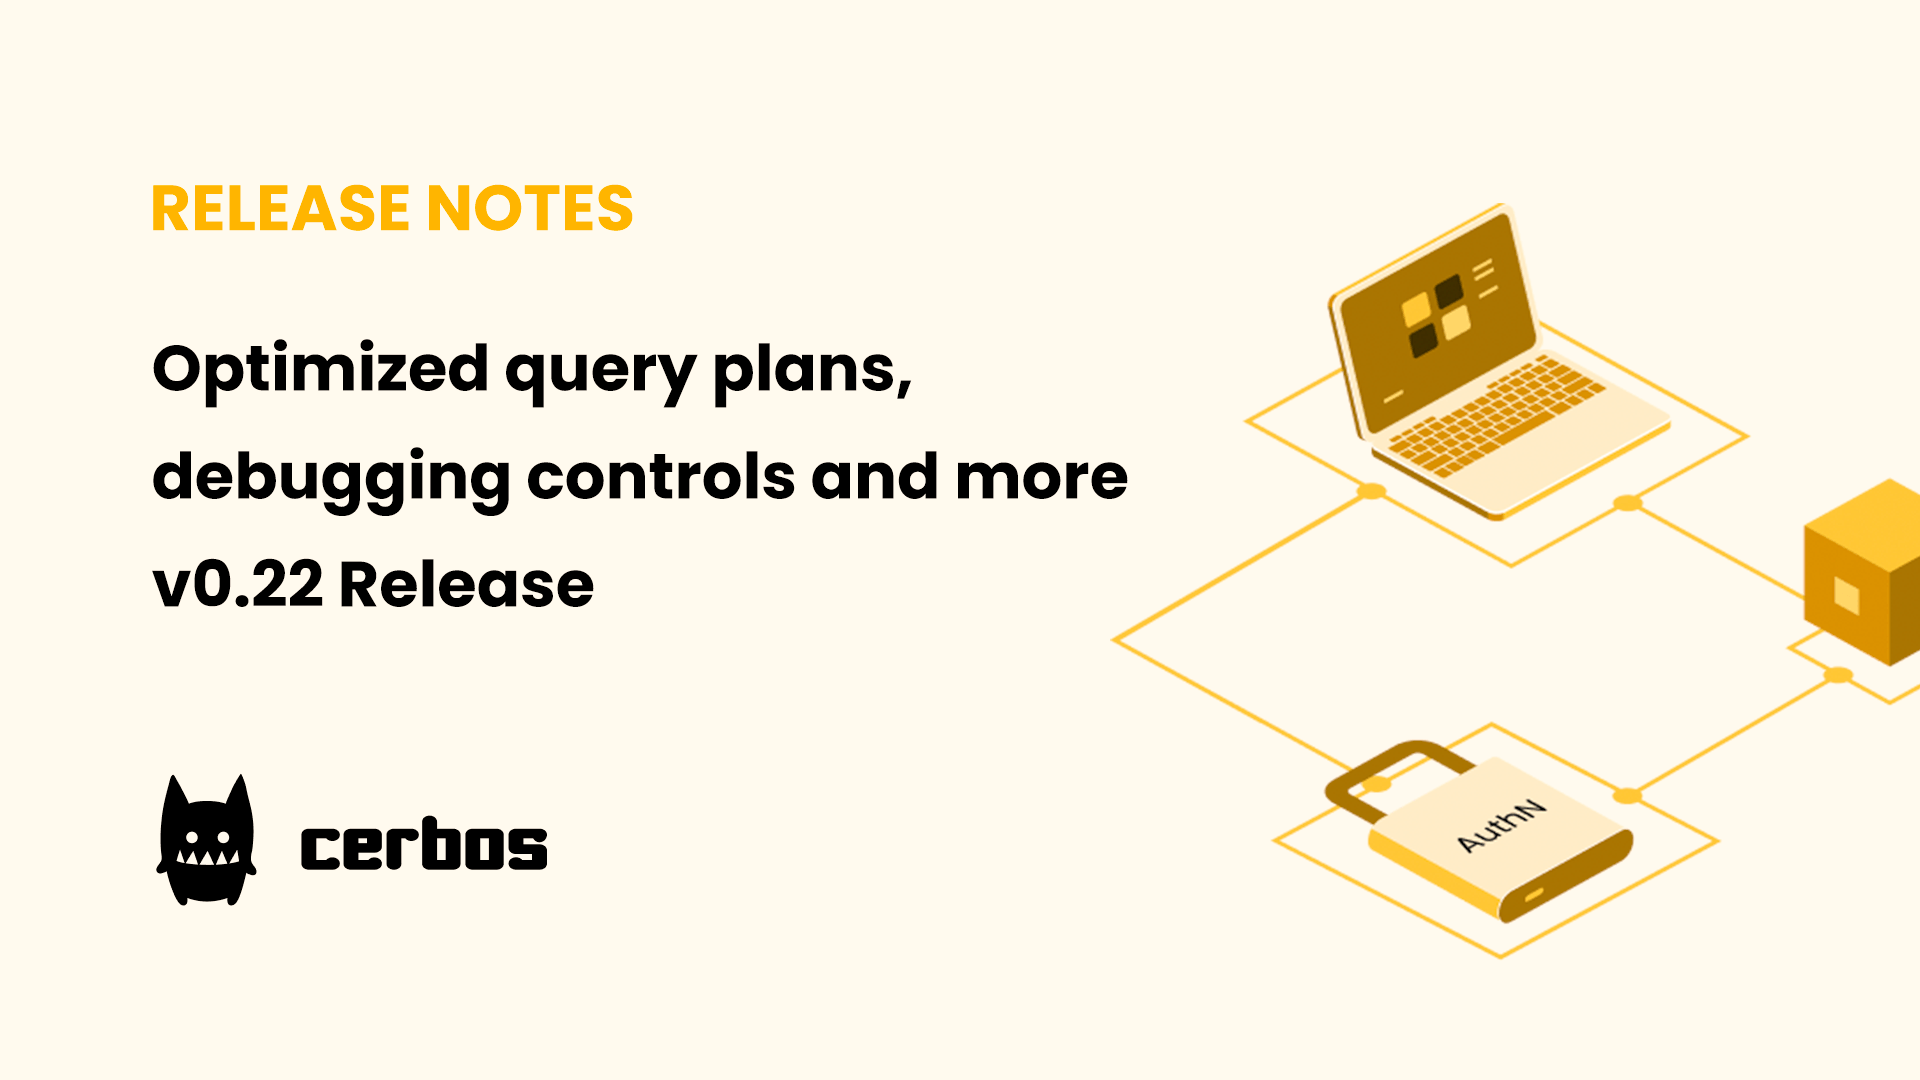 Optimized query plans, debugging controls and more - Cerbos v0.22 Release